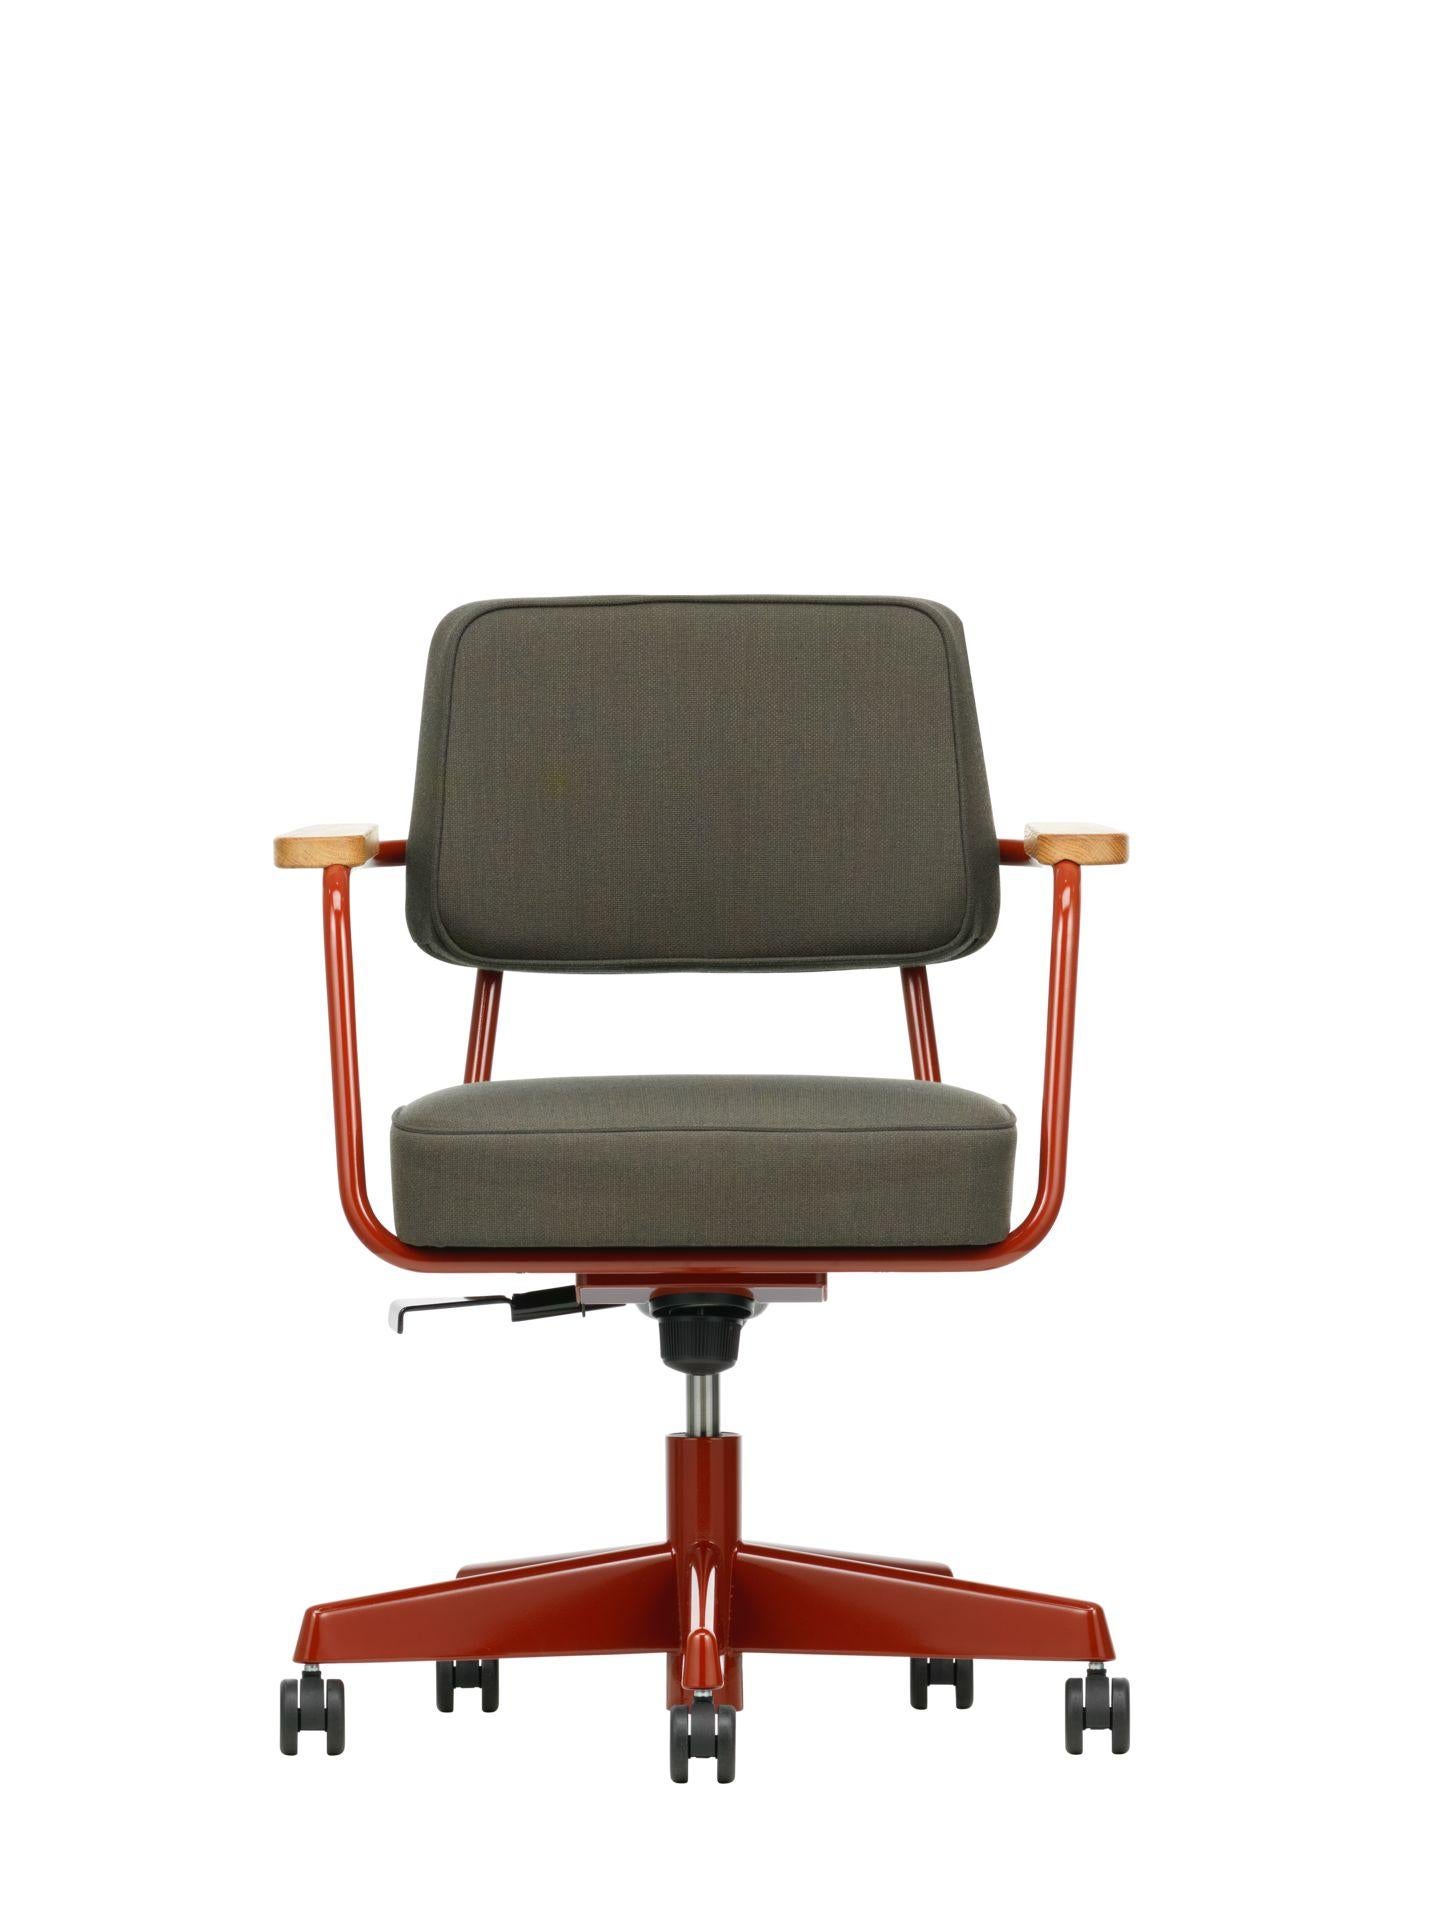 Mid-Century Modern Jean Prouvé Fauteuil Direction Pivotant Office Chair by Vitra